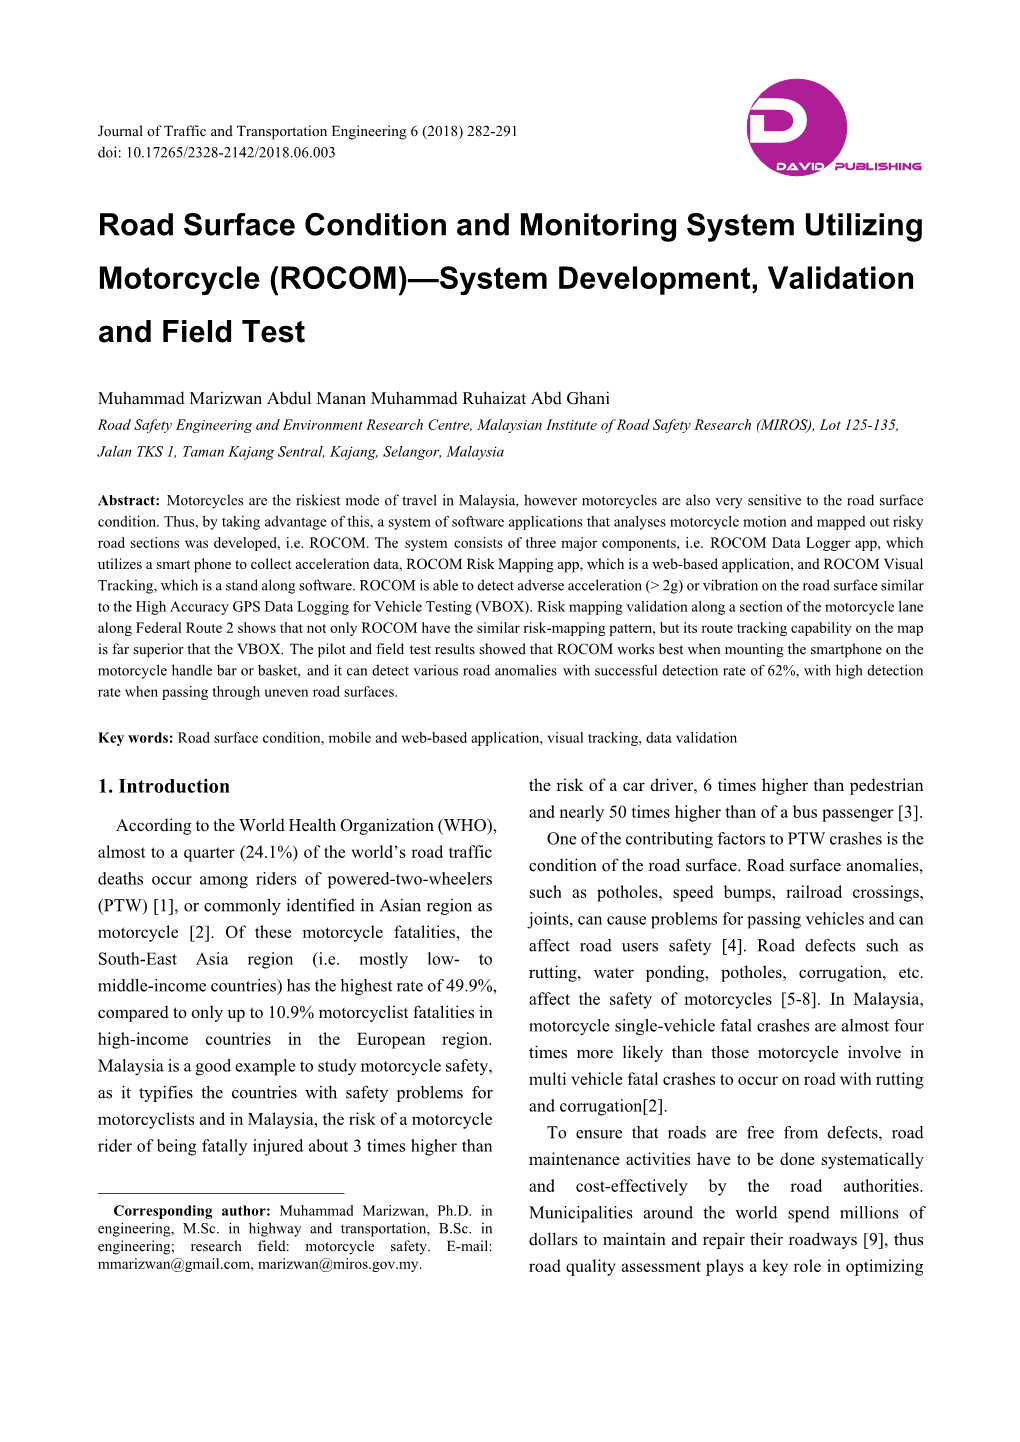 Road Surface Condition and Monitoring System Utilizing Motorcycle (ROCOM)—System Development, Validation and Field Test